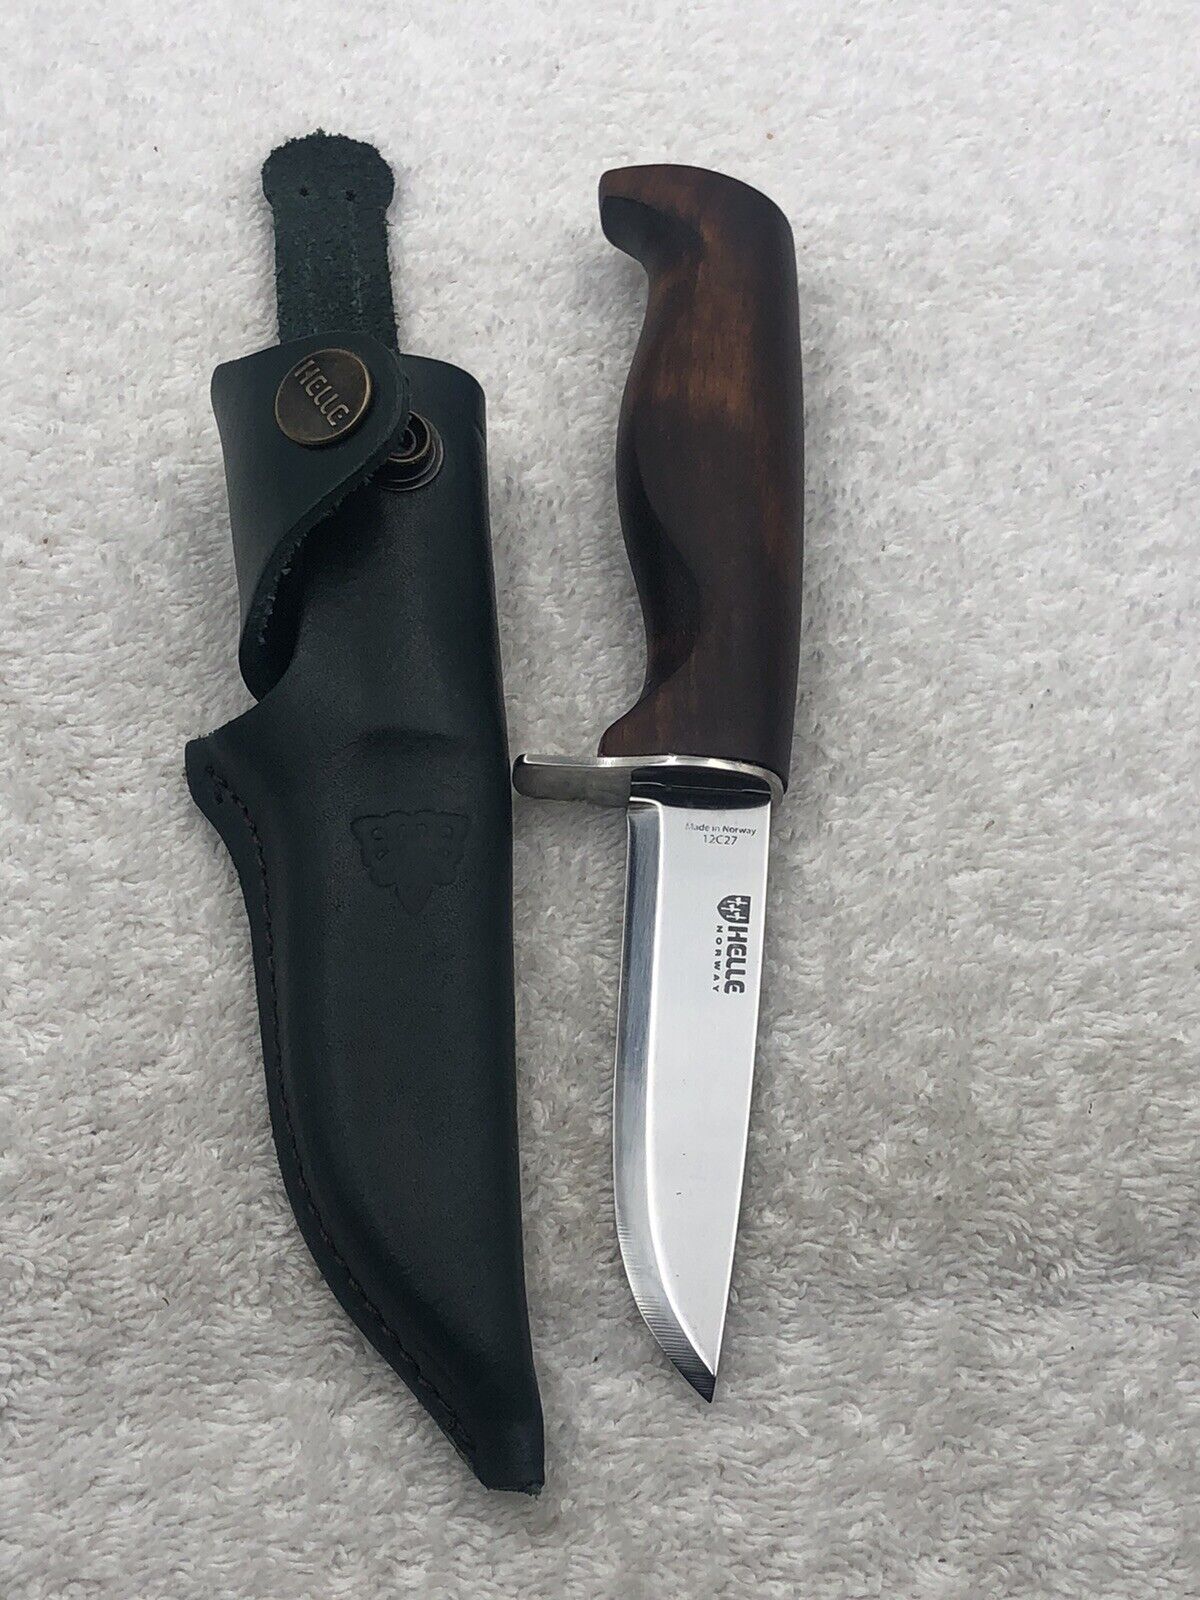 Helle Fixed Blade Sheath Knife Excellent Lightly Used Condition